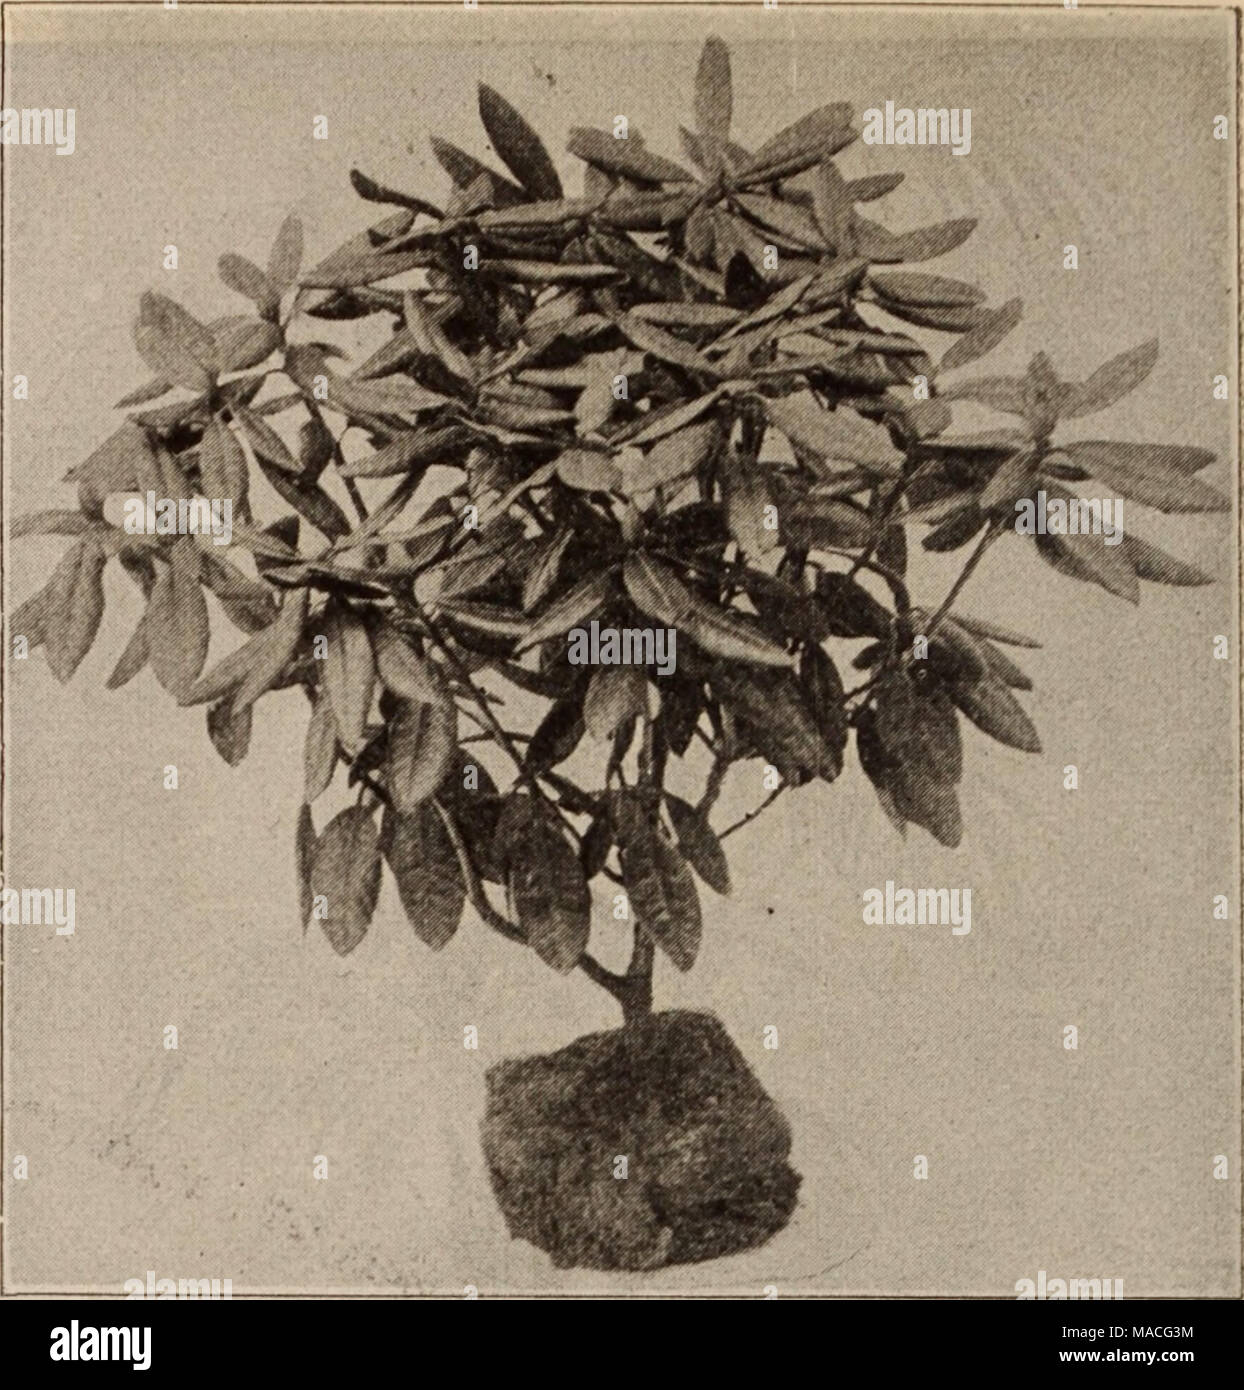 . Dreer's wholesale price list / Henry A. Dreer. . FORCING RHODODENDRON Smilax. 2'4-inch pots, 50 cts. per dozen; $3.50 per 100. Swainsona. Qaleslfolia Alba. 3-inch pots, $1.00 per doz.; $7.00 per 100. Stigmaphyllon Ciliatum. (Brazilian Golden or Orchid Vine.) One of our most beautiful flowering climbers, either for the greenhouse or open air. 15 cts. each; $1.50 per doz. Sparmania Africana. A good, winter flowering plant for the amateur's conservatory or window garden. 3-inch pots, 15 cts. each; $1.50 per dozen. Thunbergia Harrisii. A splendid winter flowering greenhouse climber, with showy,  Stock Photo